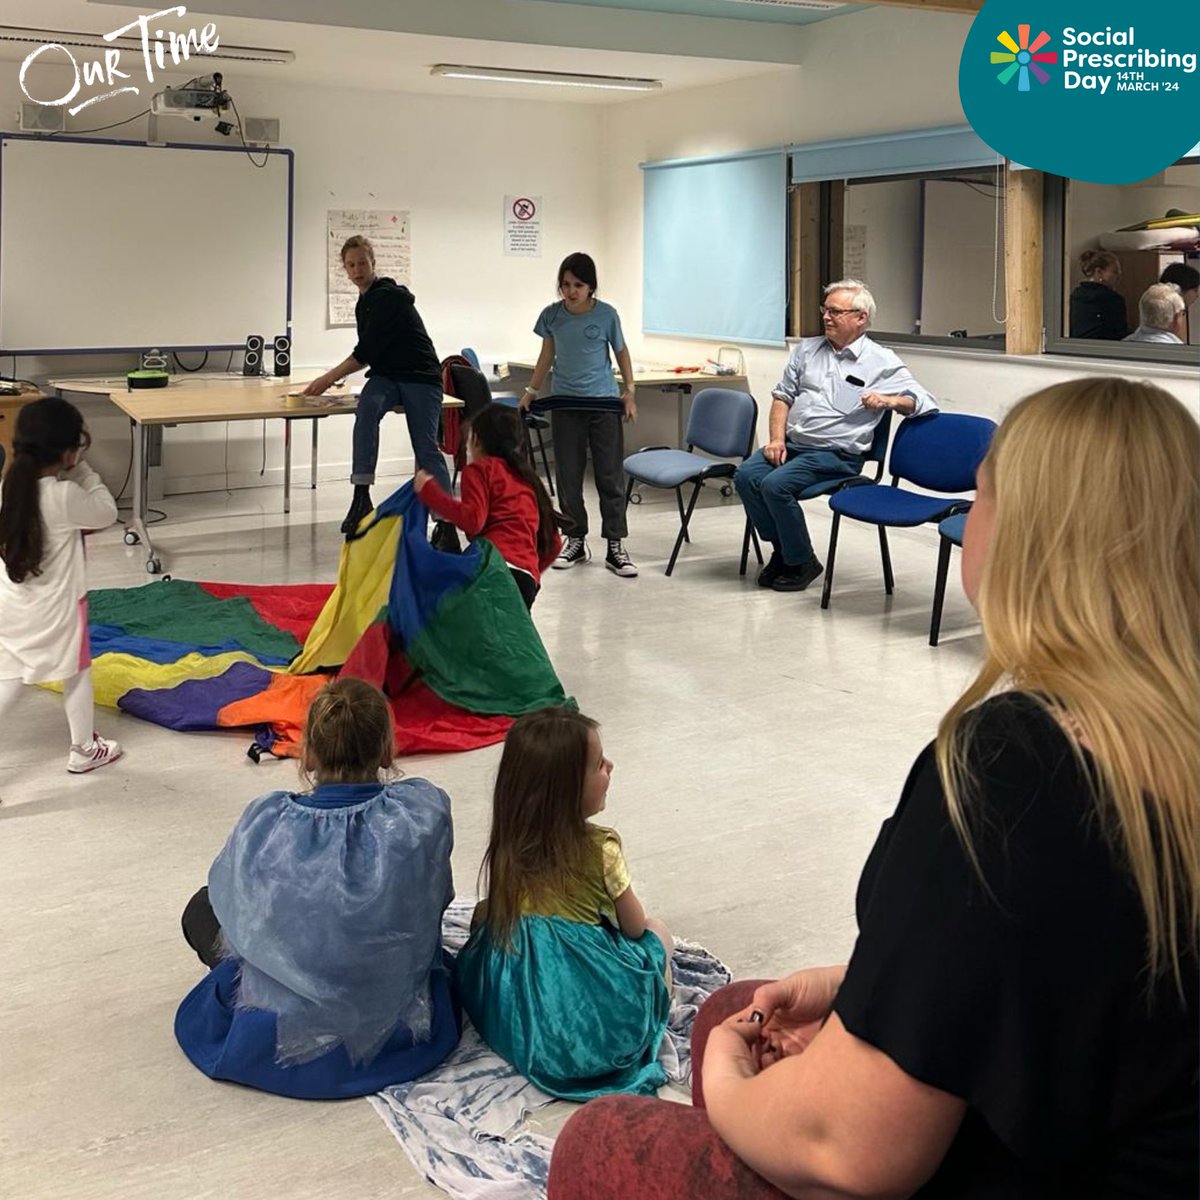 Thanks to social prescribing pioneer Professor Sir Sam Everington for visiting Hackney's KidsTime Workshop recently and a big shout out to the facilitators who regularly offer vital community support for families 💫 #SocialPrescribingDay #WhatMattersToYou #MentalHealth #KidsTime